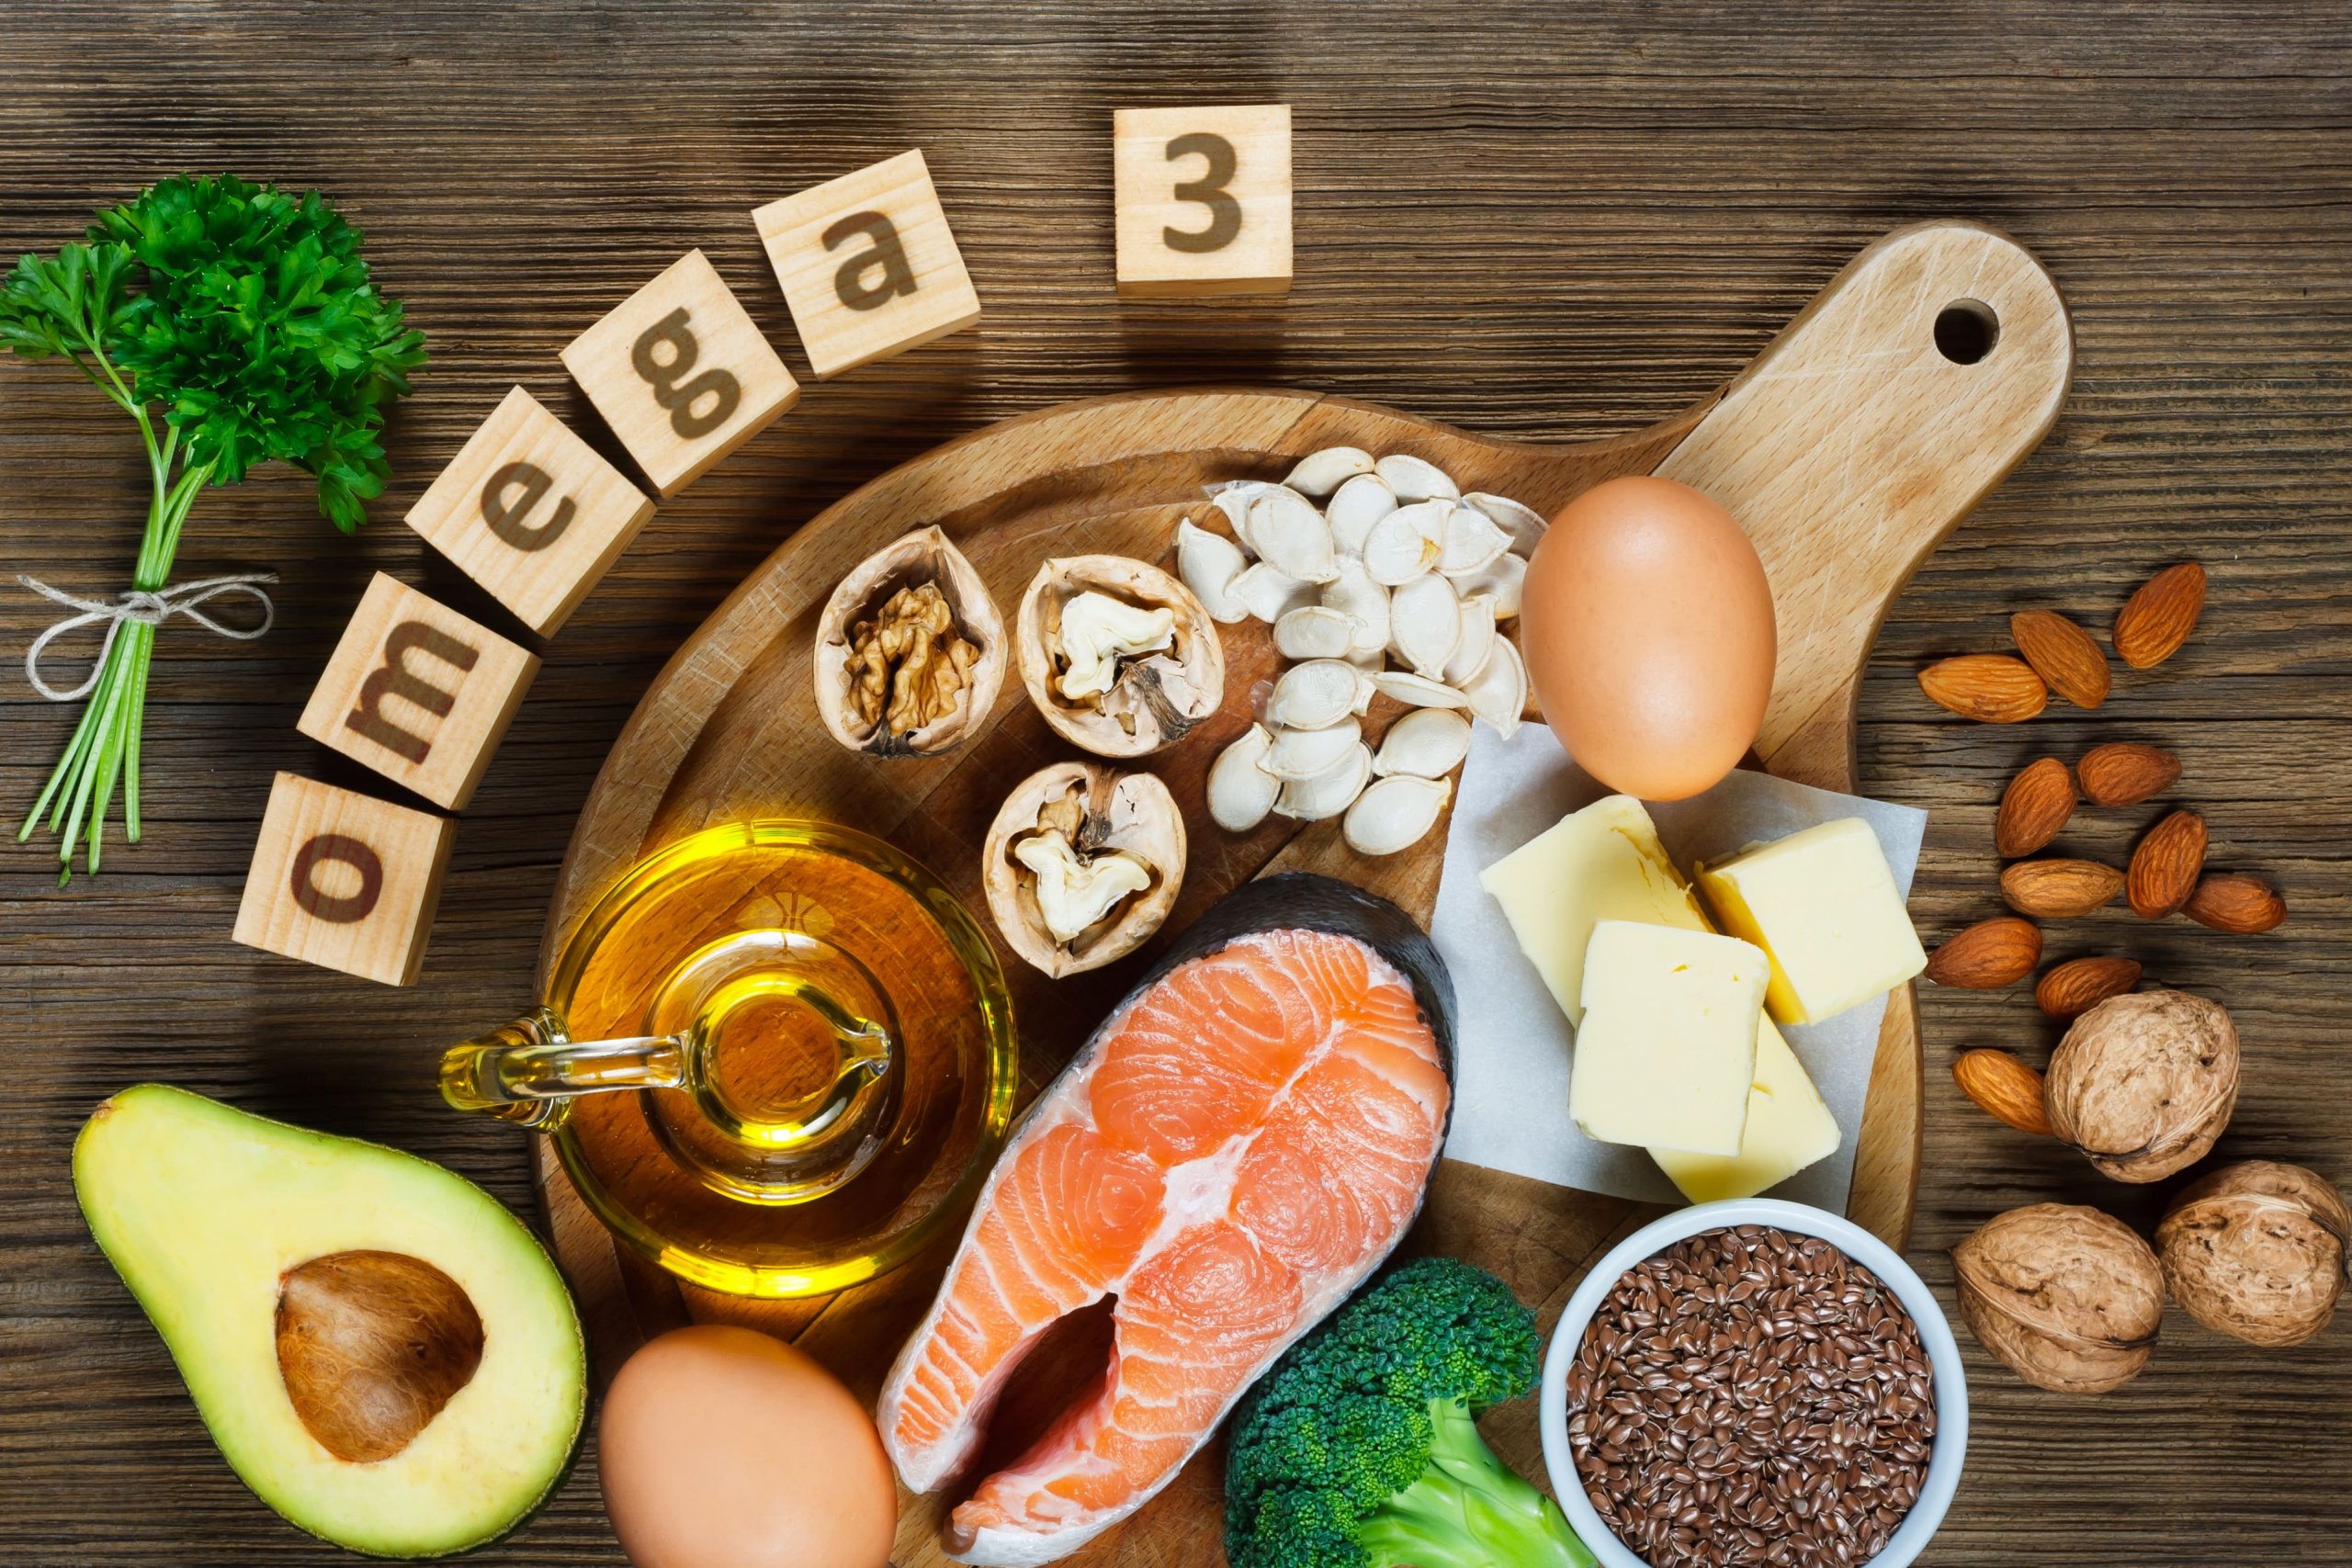 Omega-3s are great for gut health